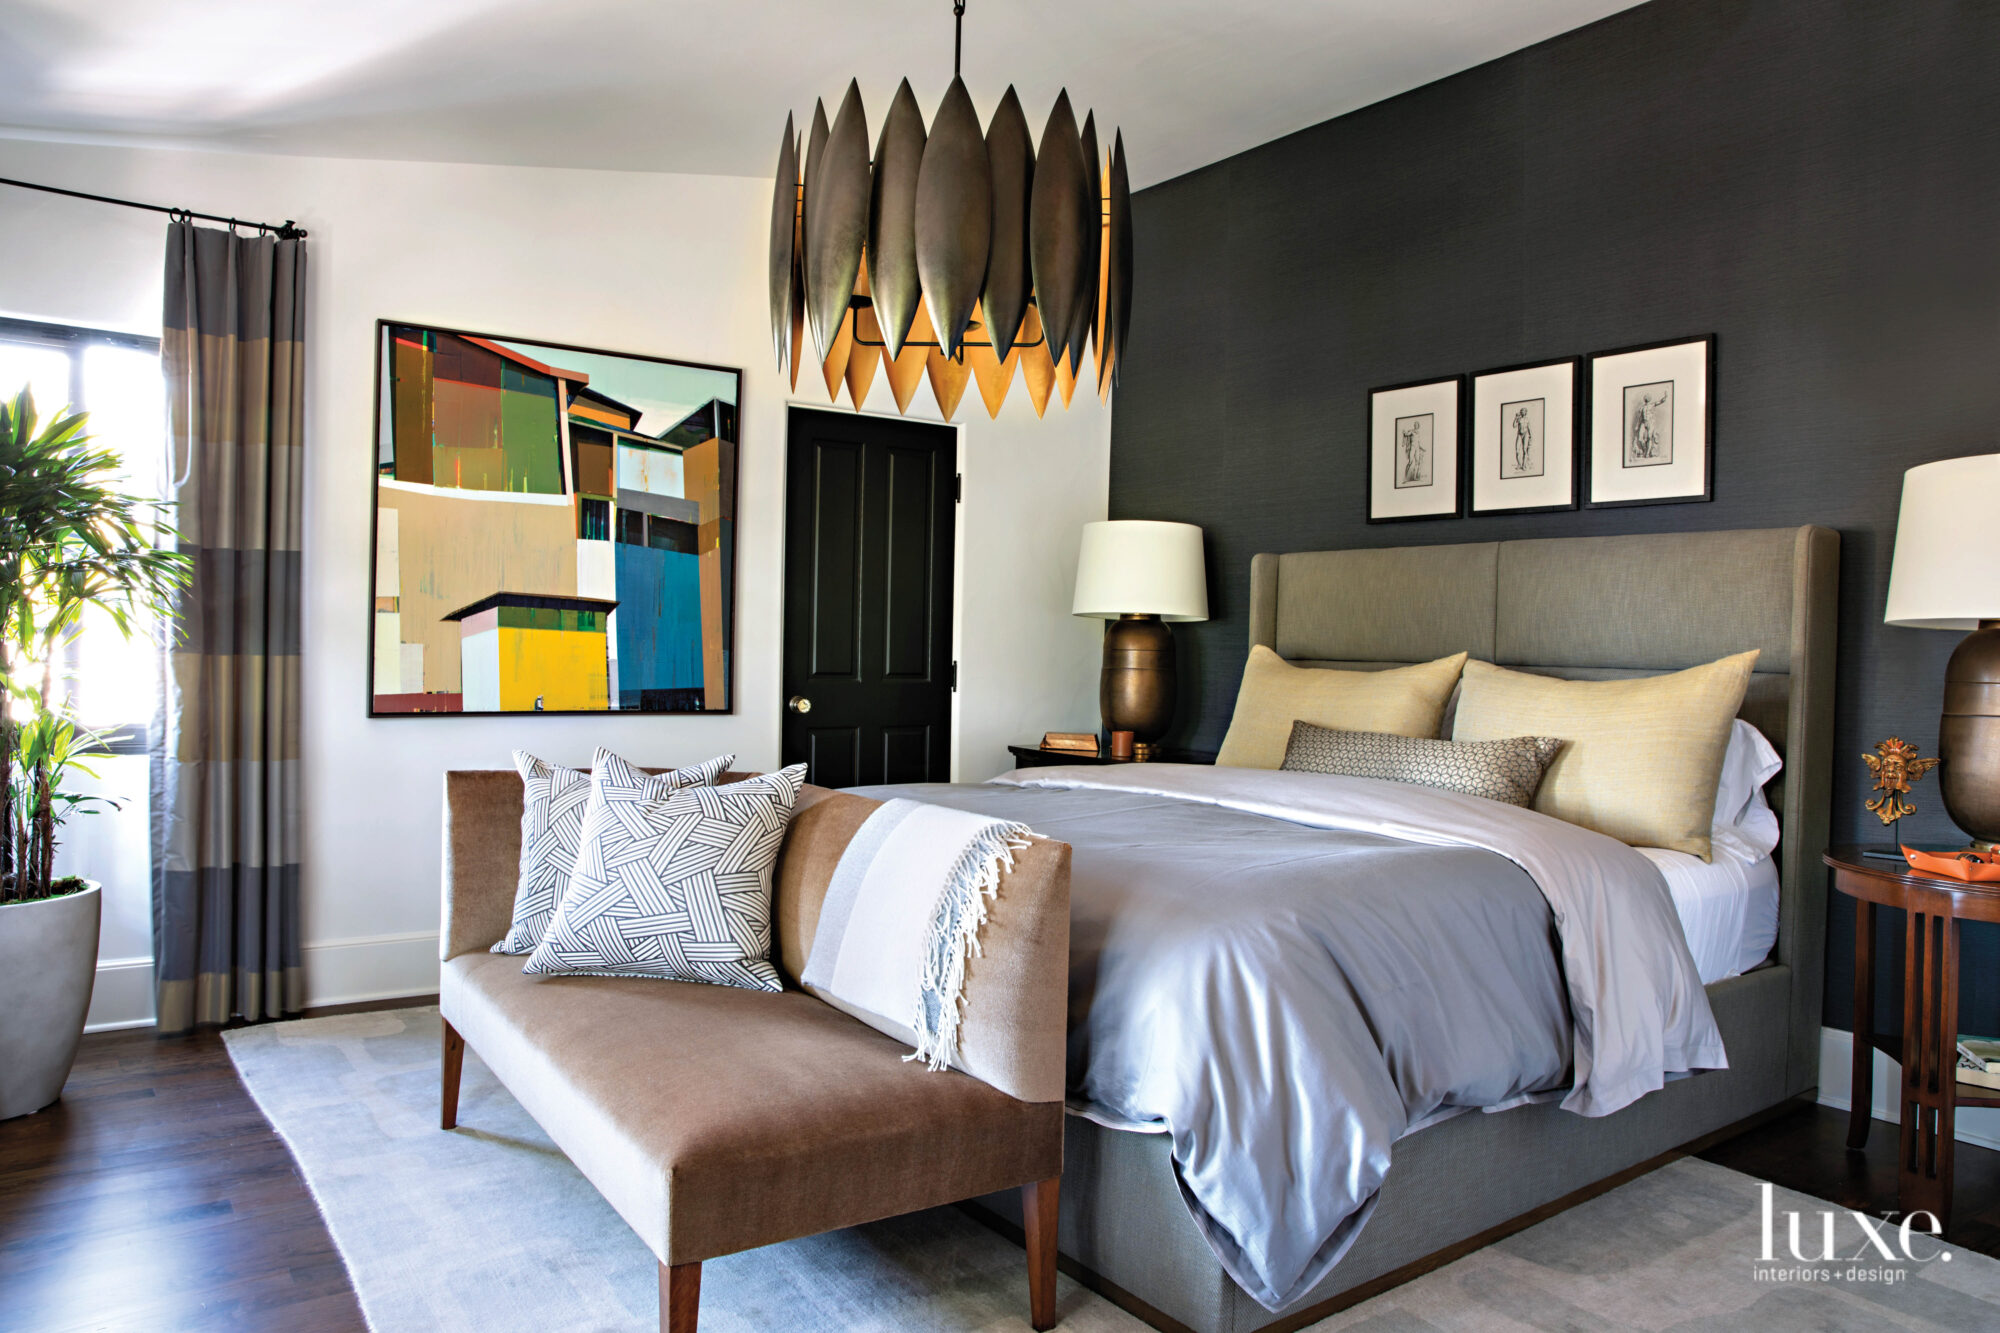 BEdroom with dark accent wall behind bed frame and contemporary light fixture above